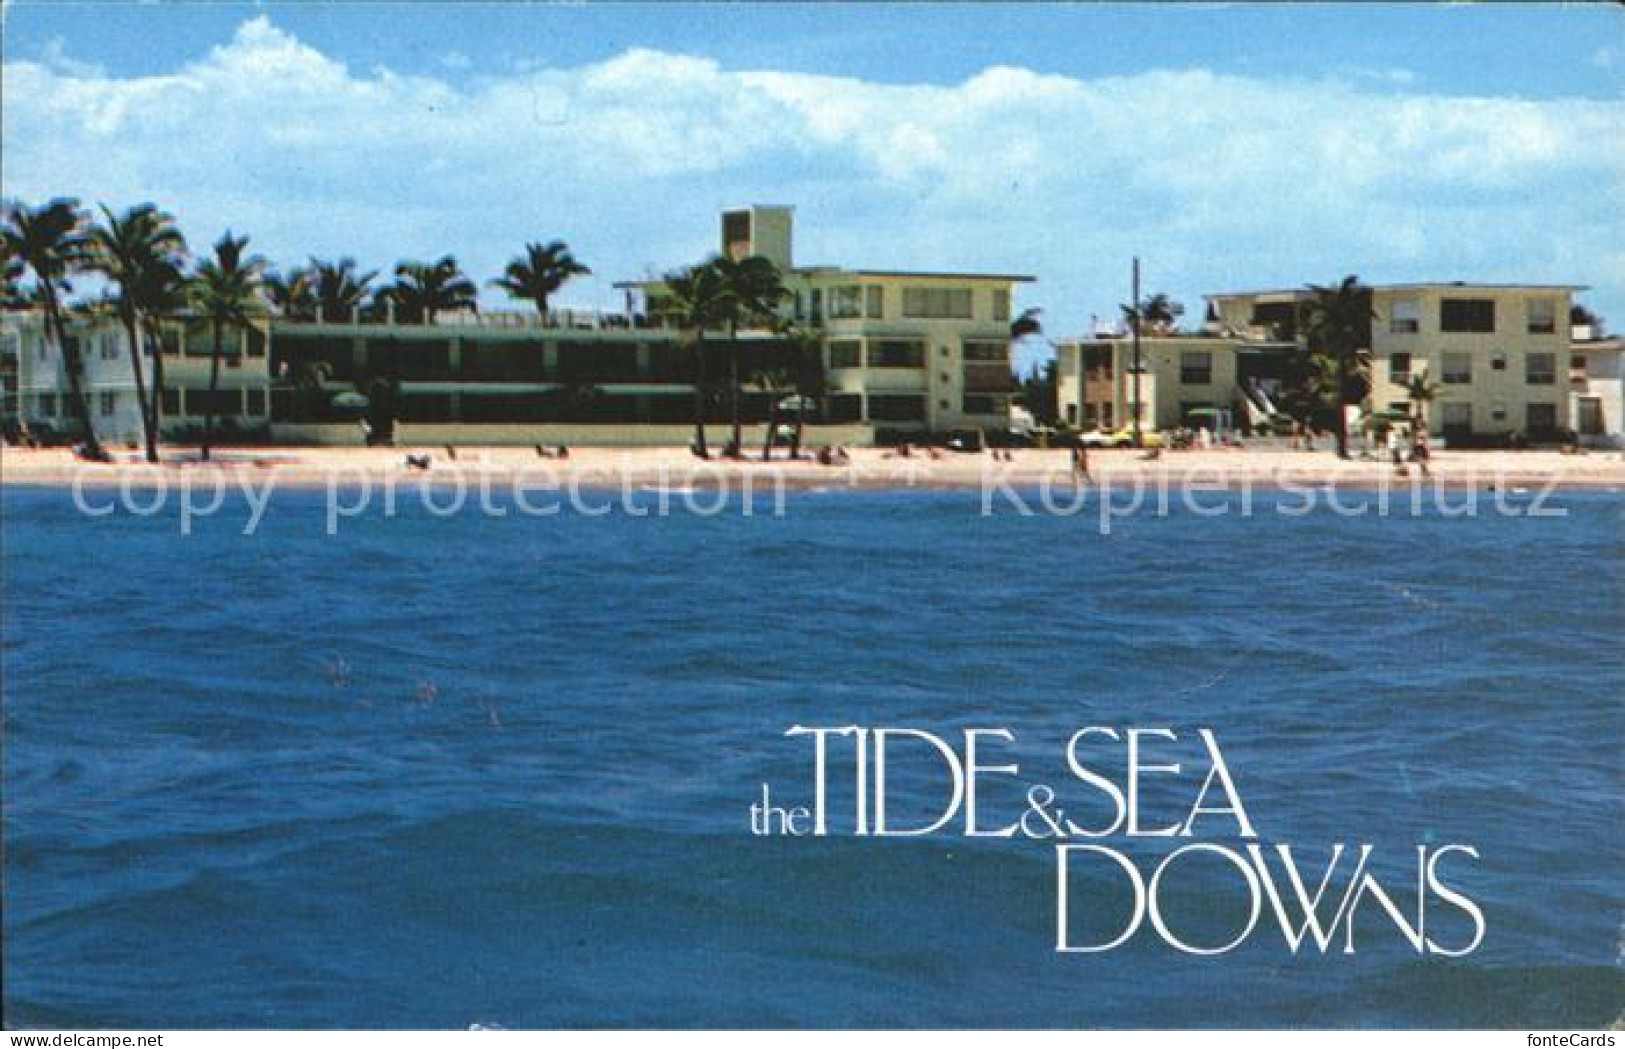 72124554 Hollywood_Florida The Tide And See Downs Apartment Motel - Otros & Sin Clasificación